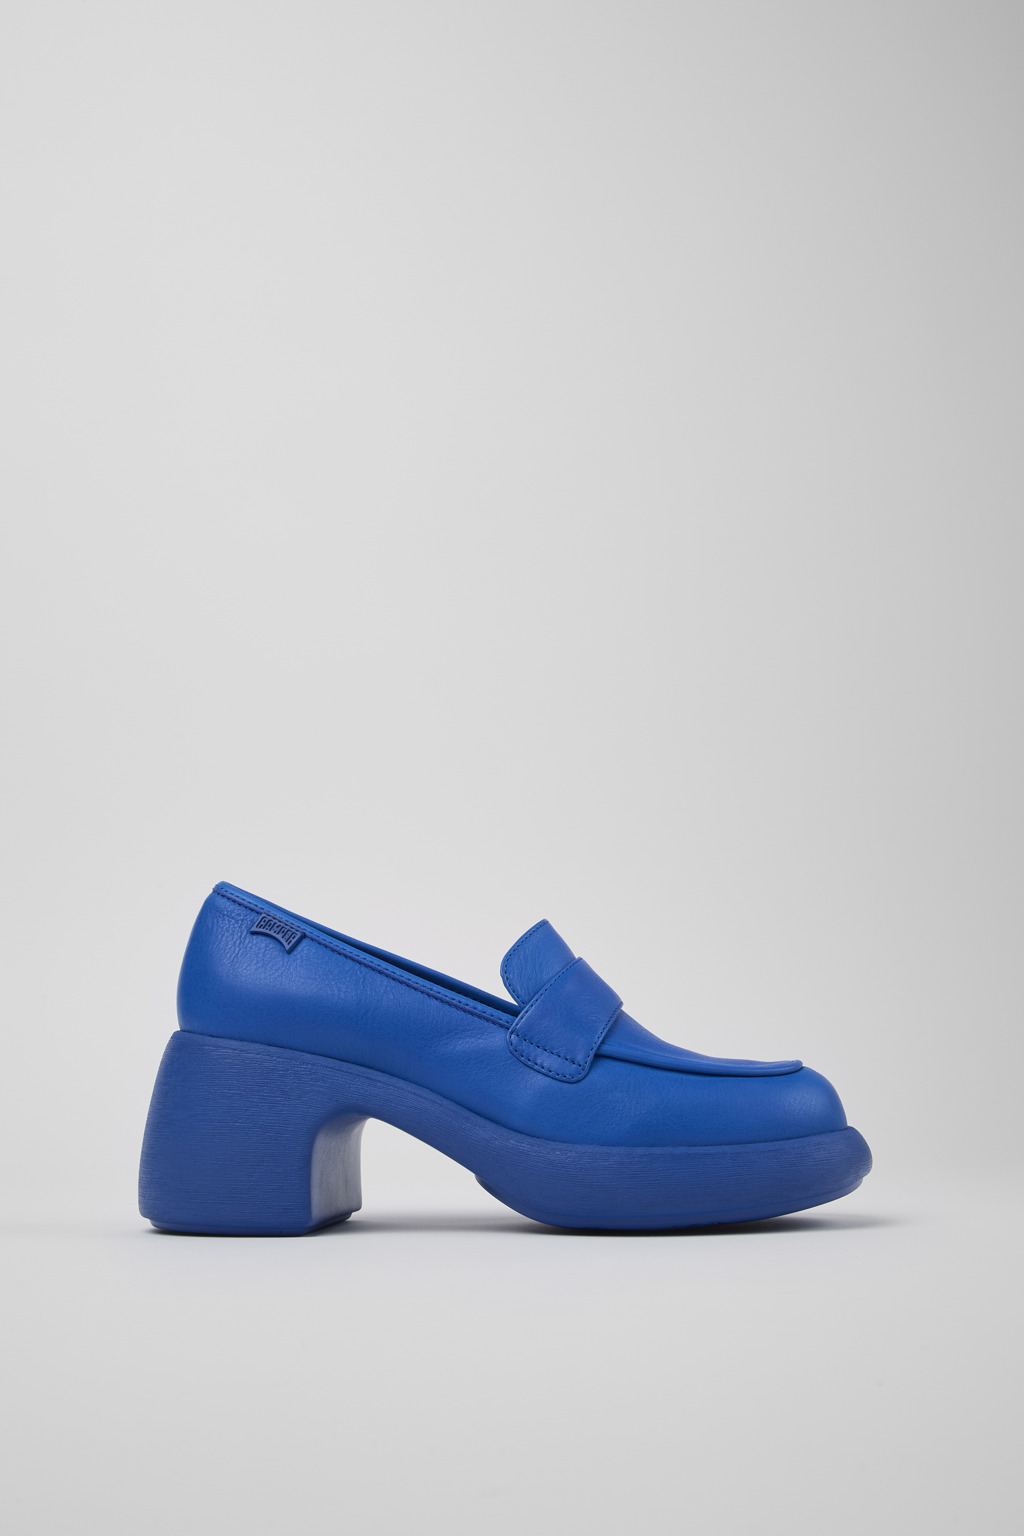 Thelma Blue Loafers for Women - Camper USA